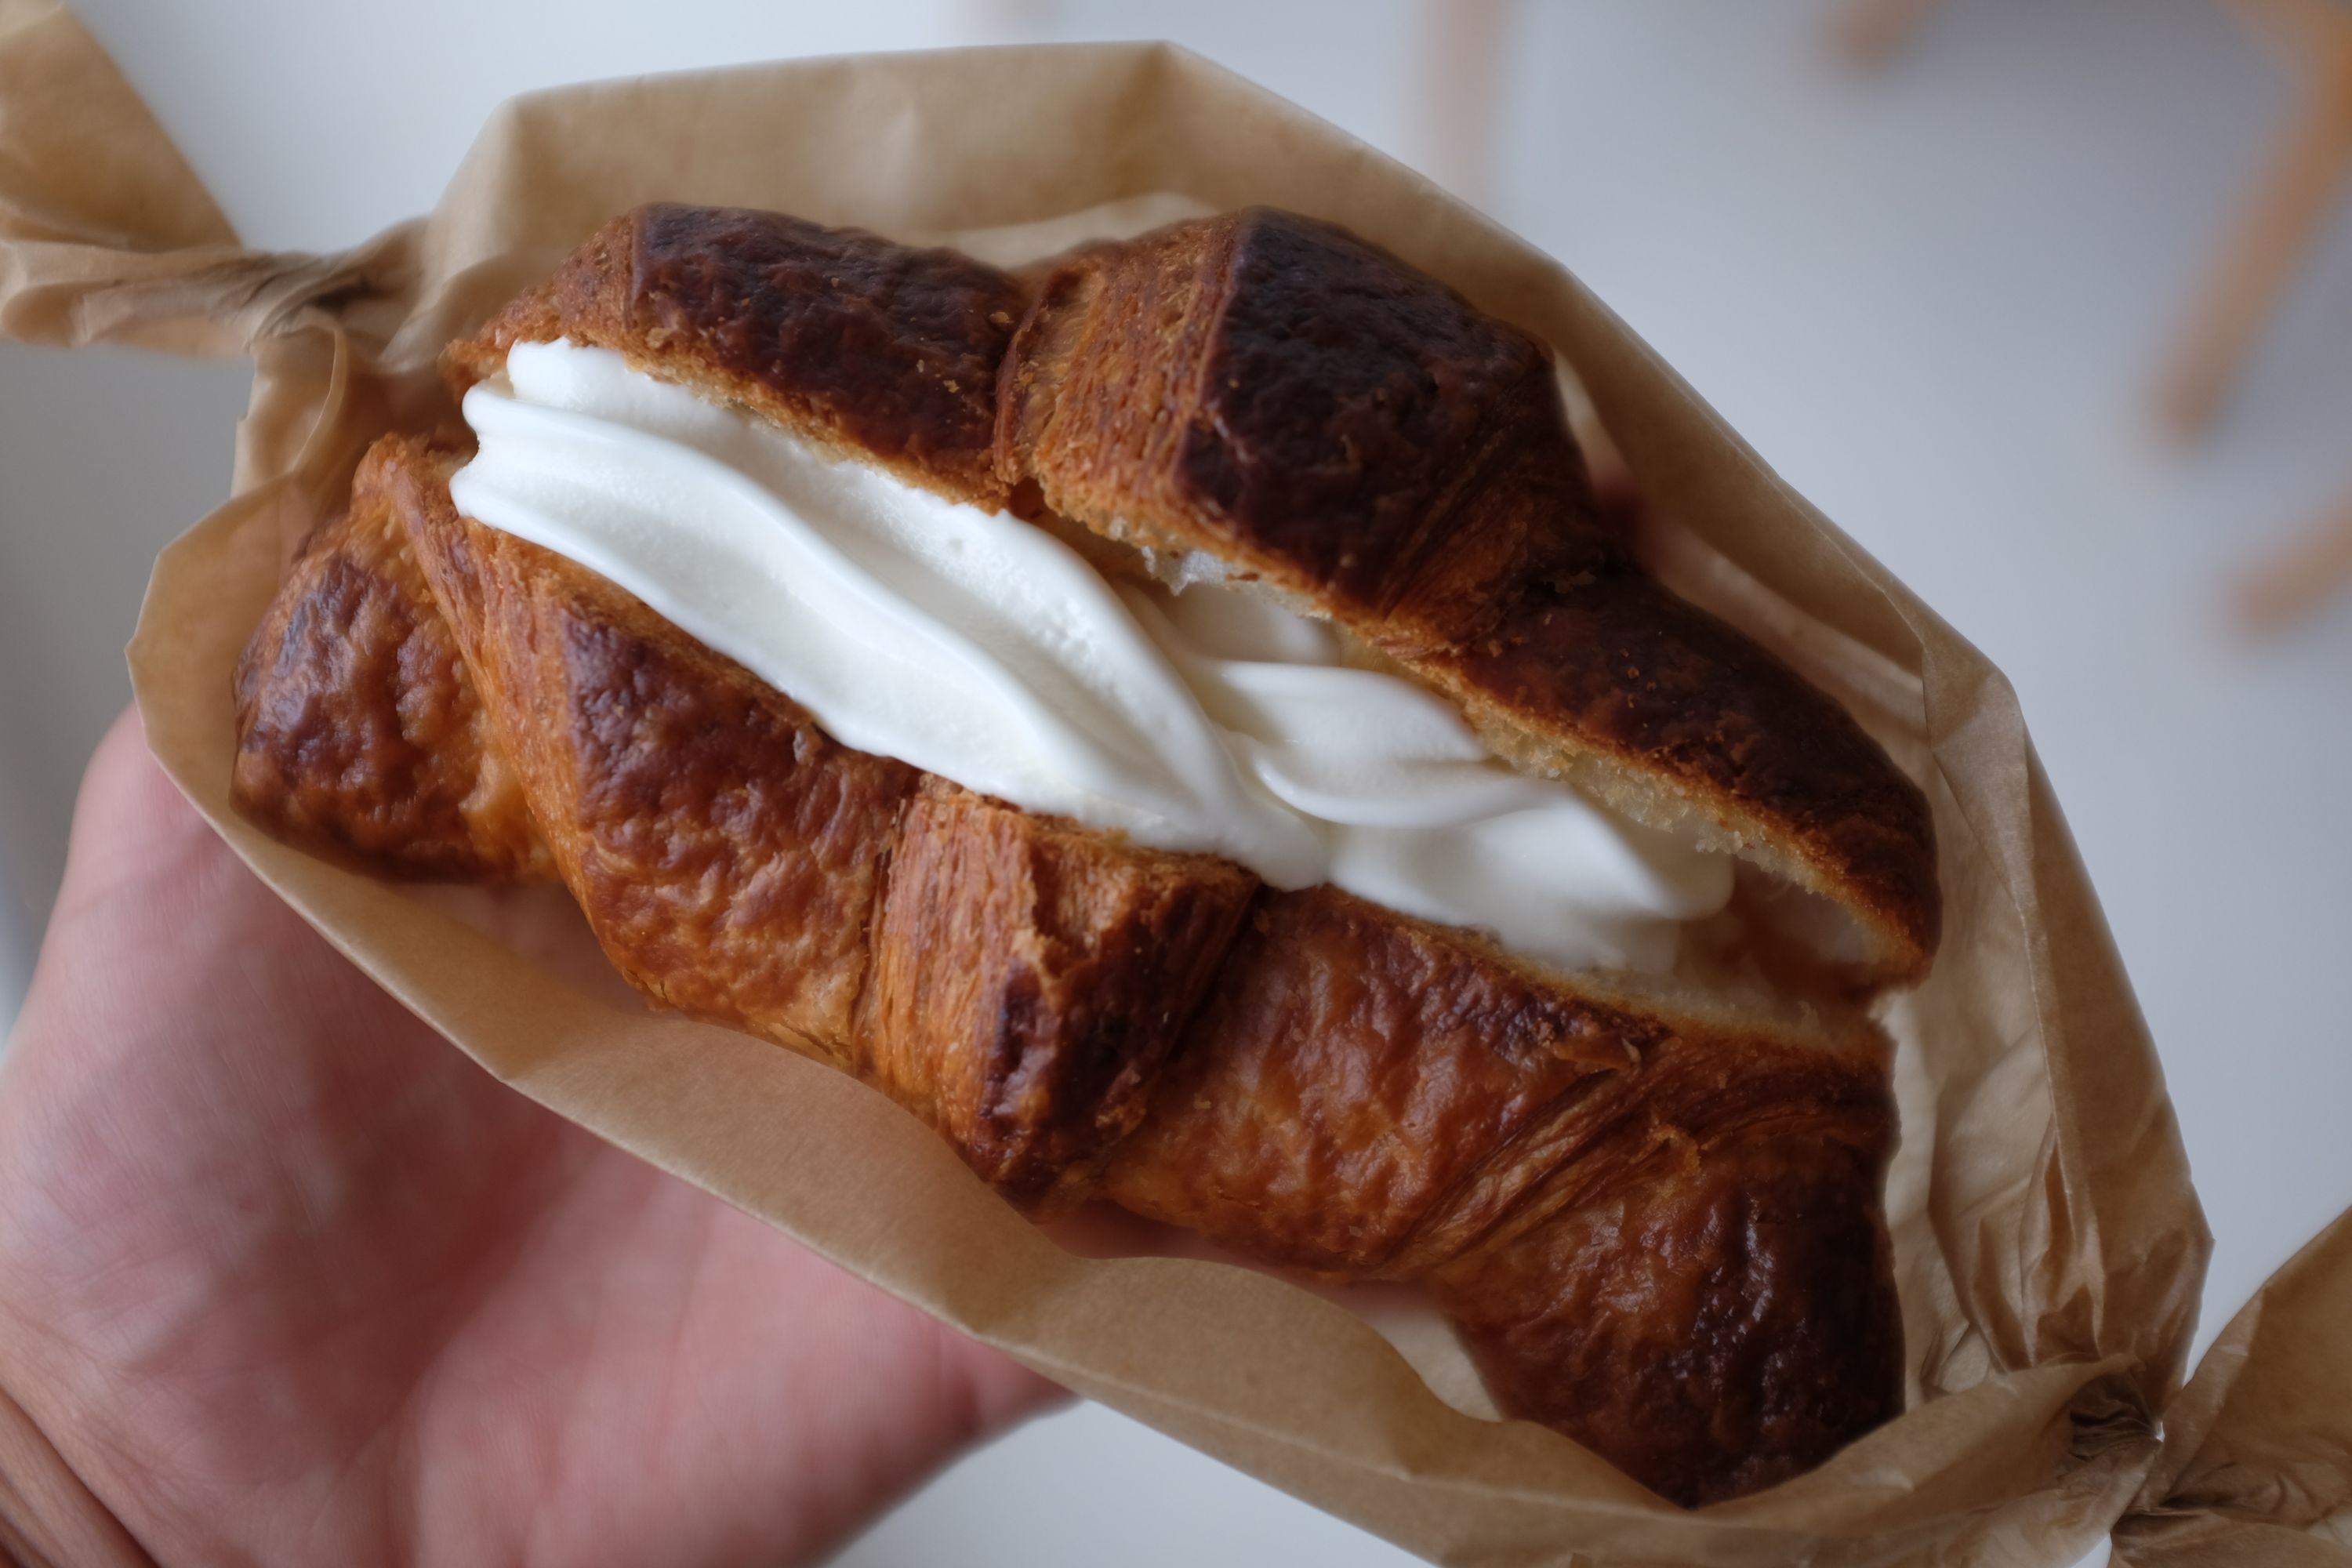 A croissant filled with ice cream.